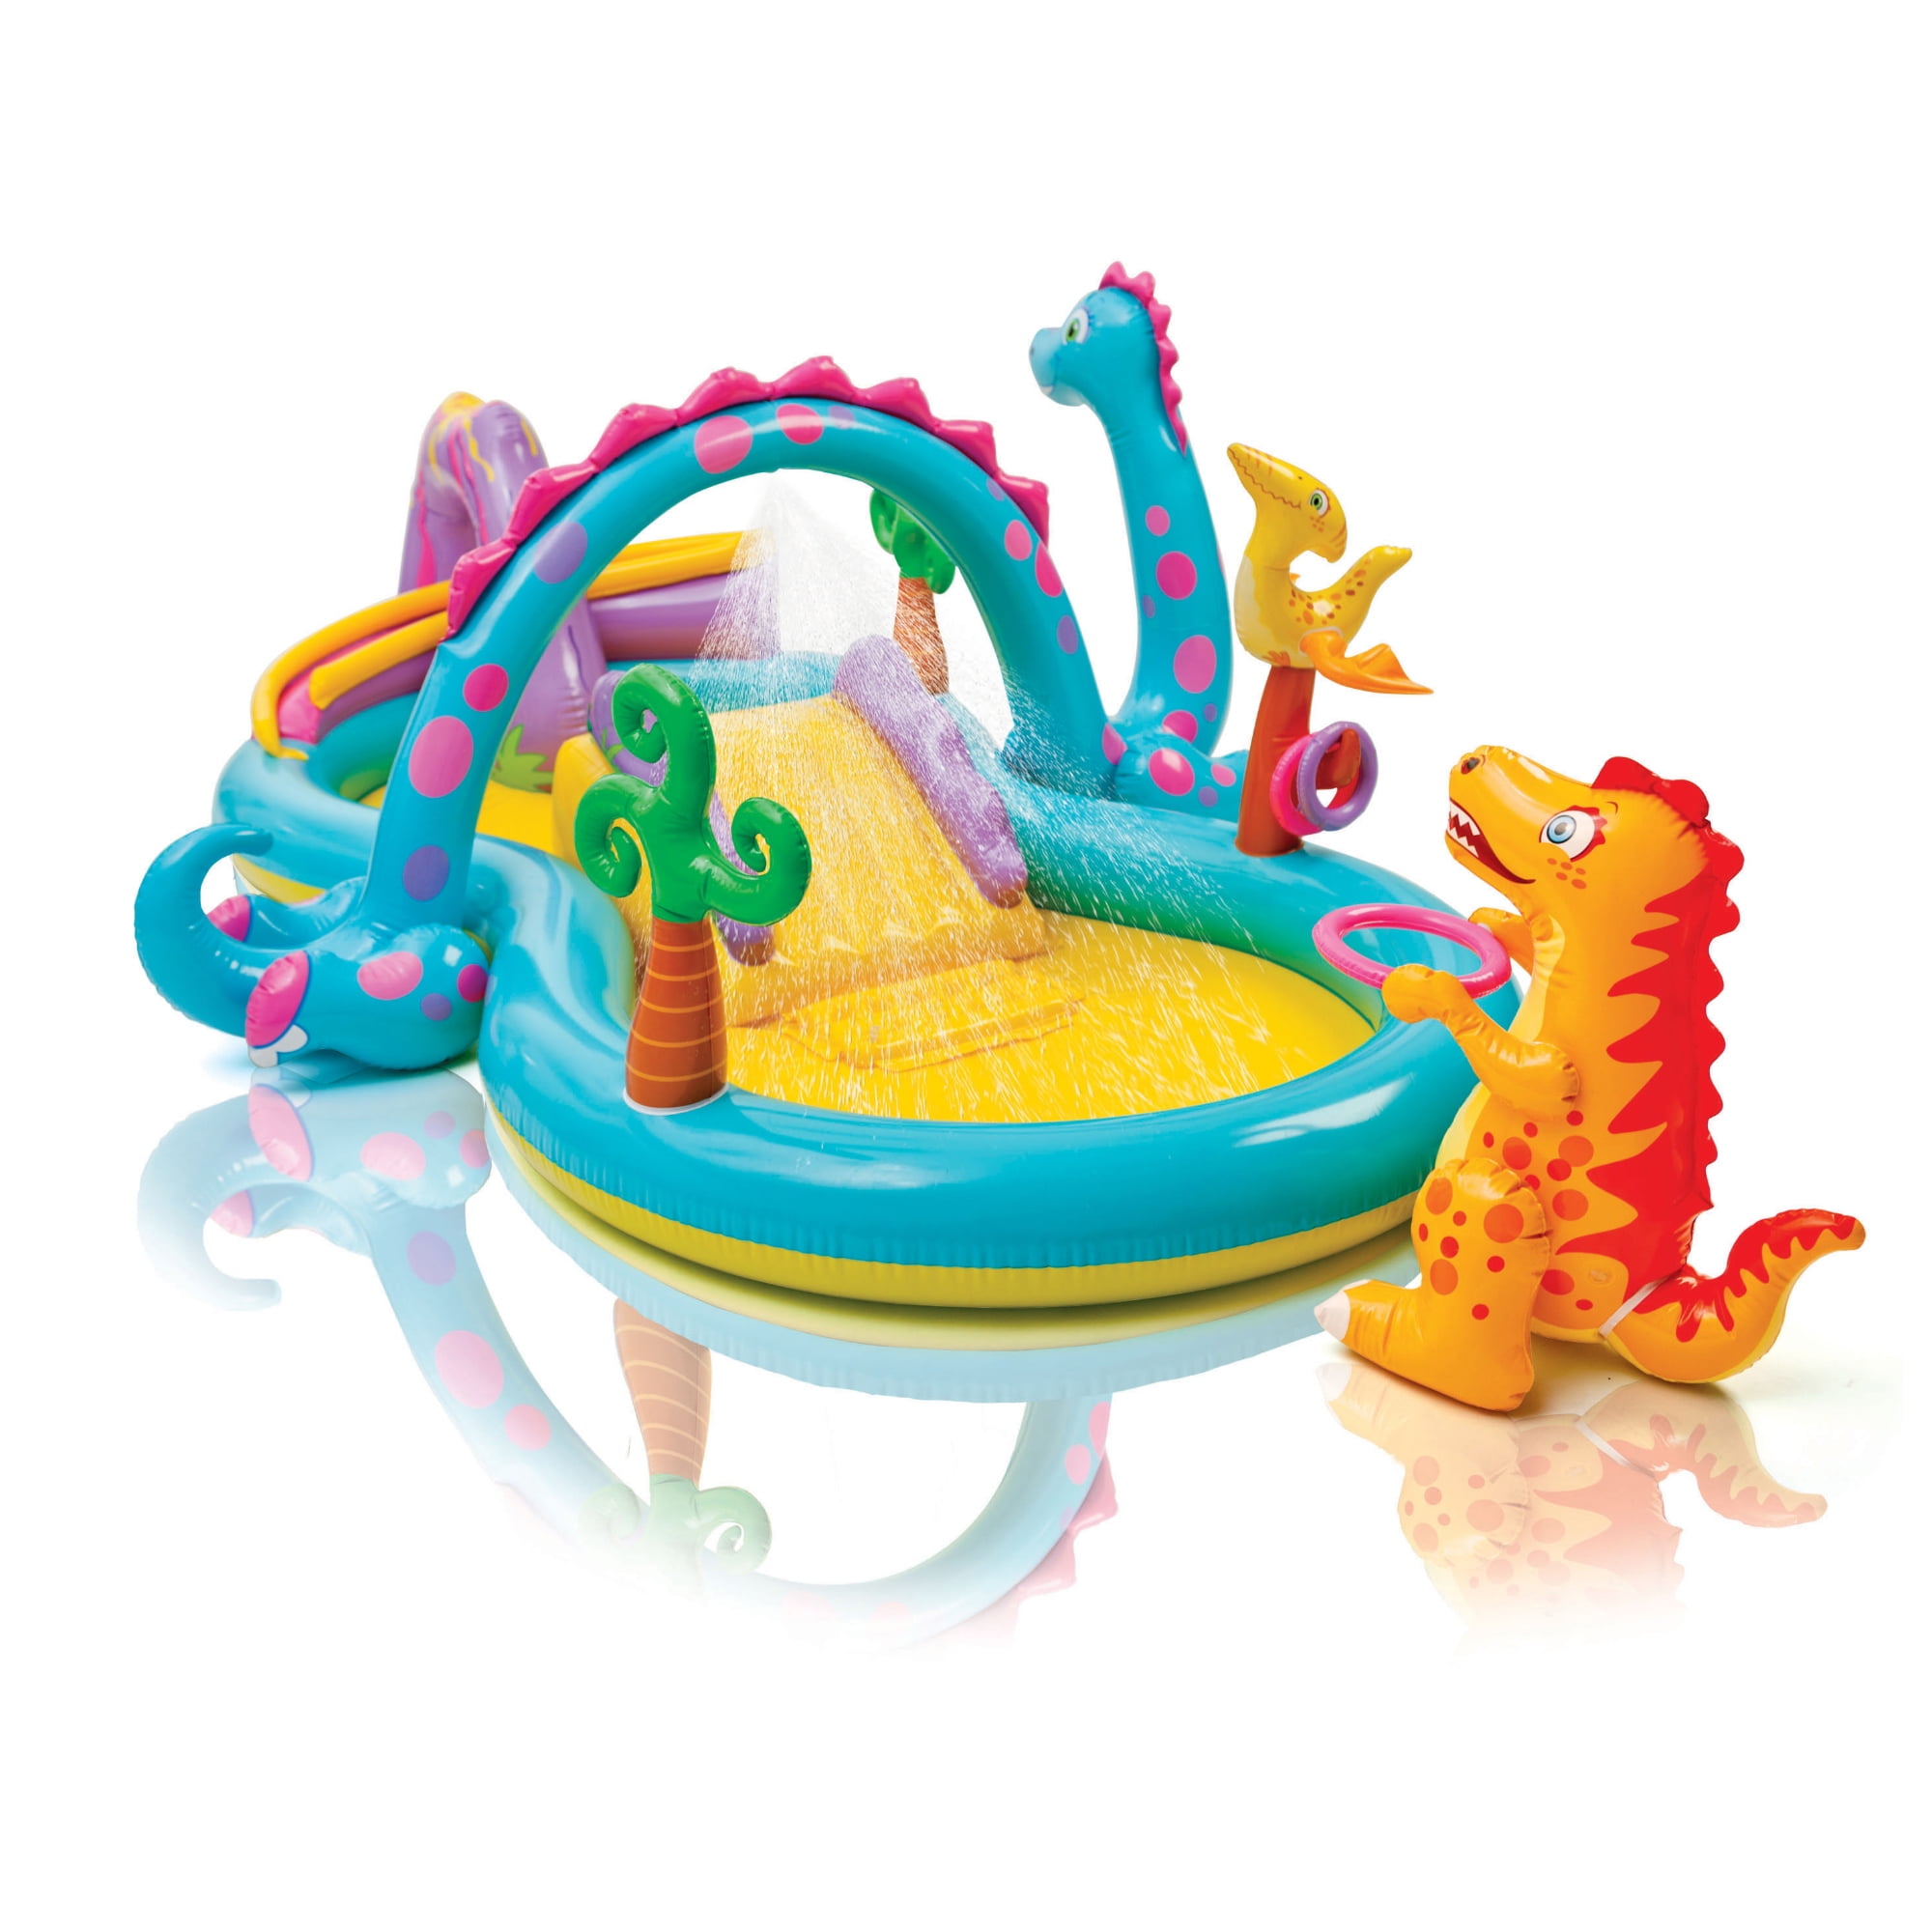 Intex Inflatable Fantasy Castle Water Play Swimming Pool Center for Kids Ages 2+ 